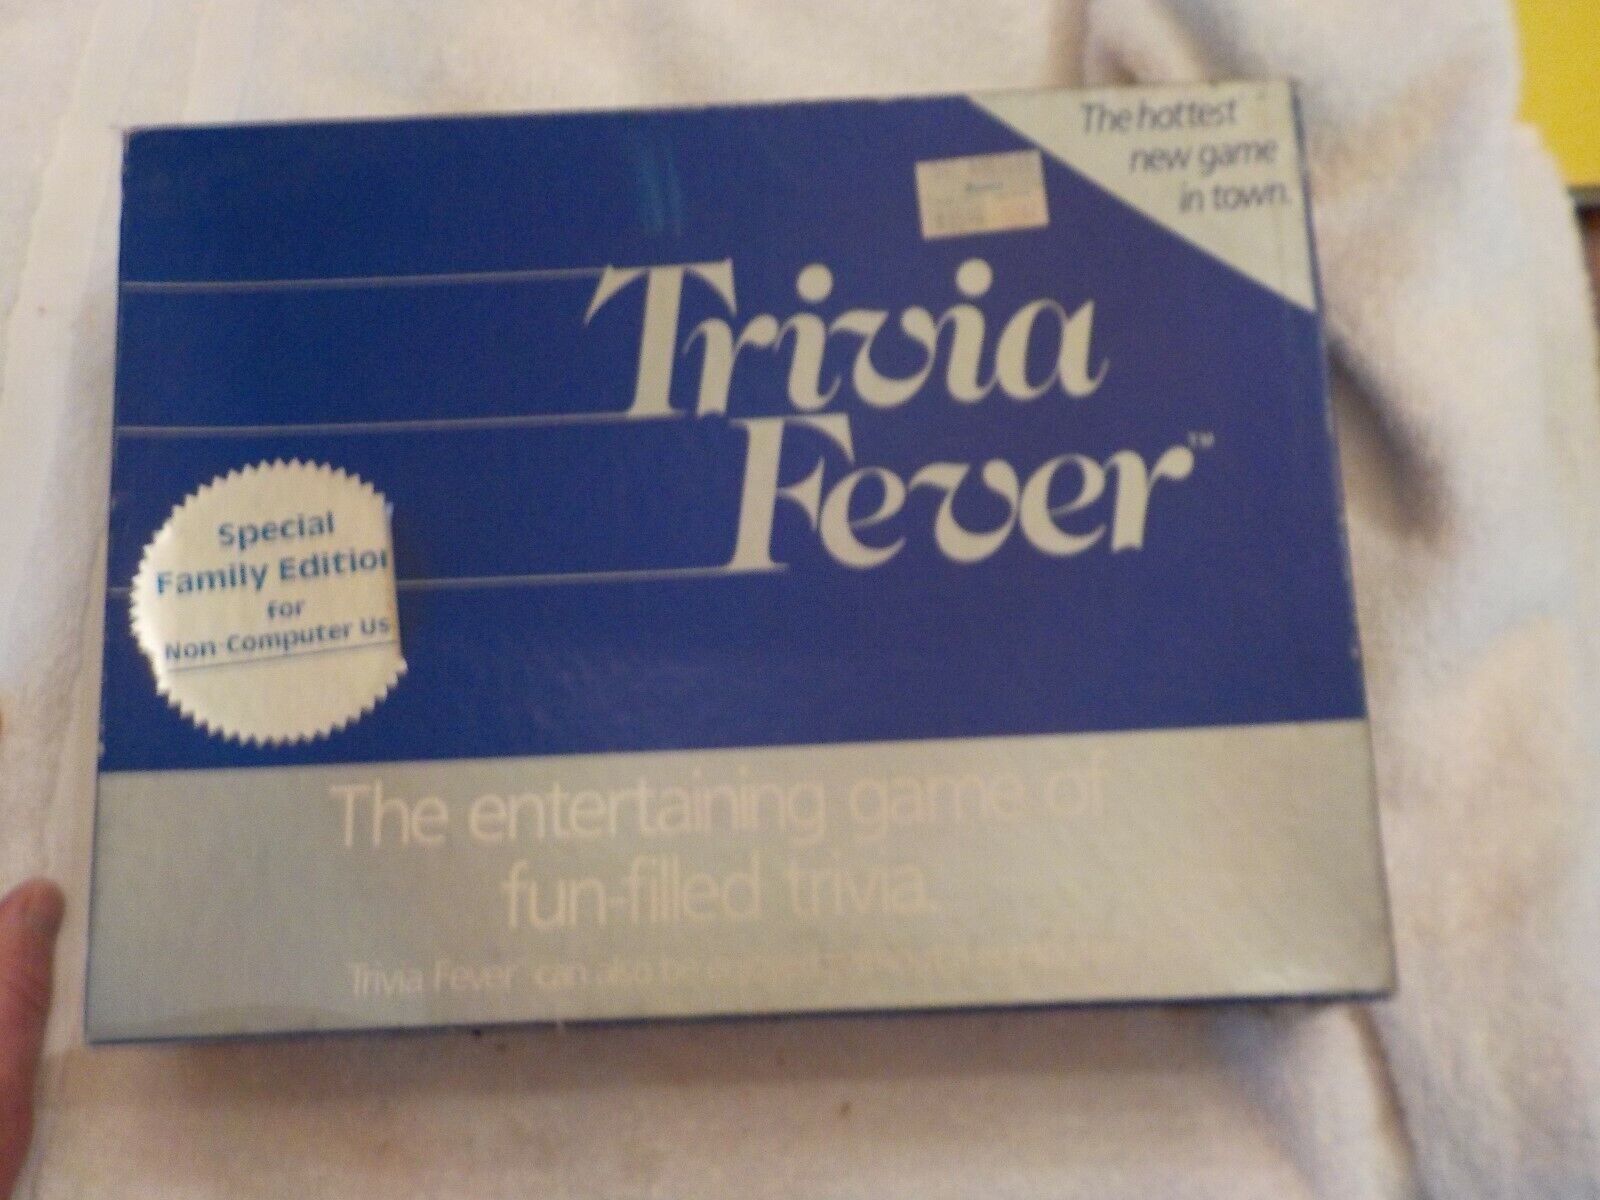 1984 TRIVIA FEVER Game-Special Family Edition for non-computer use